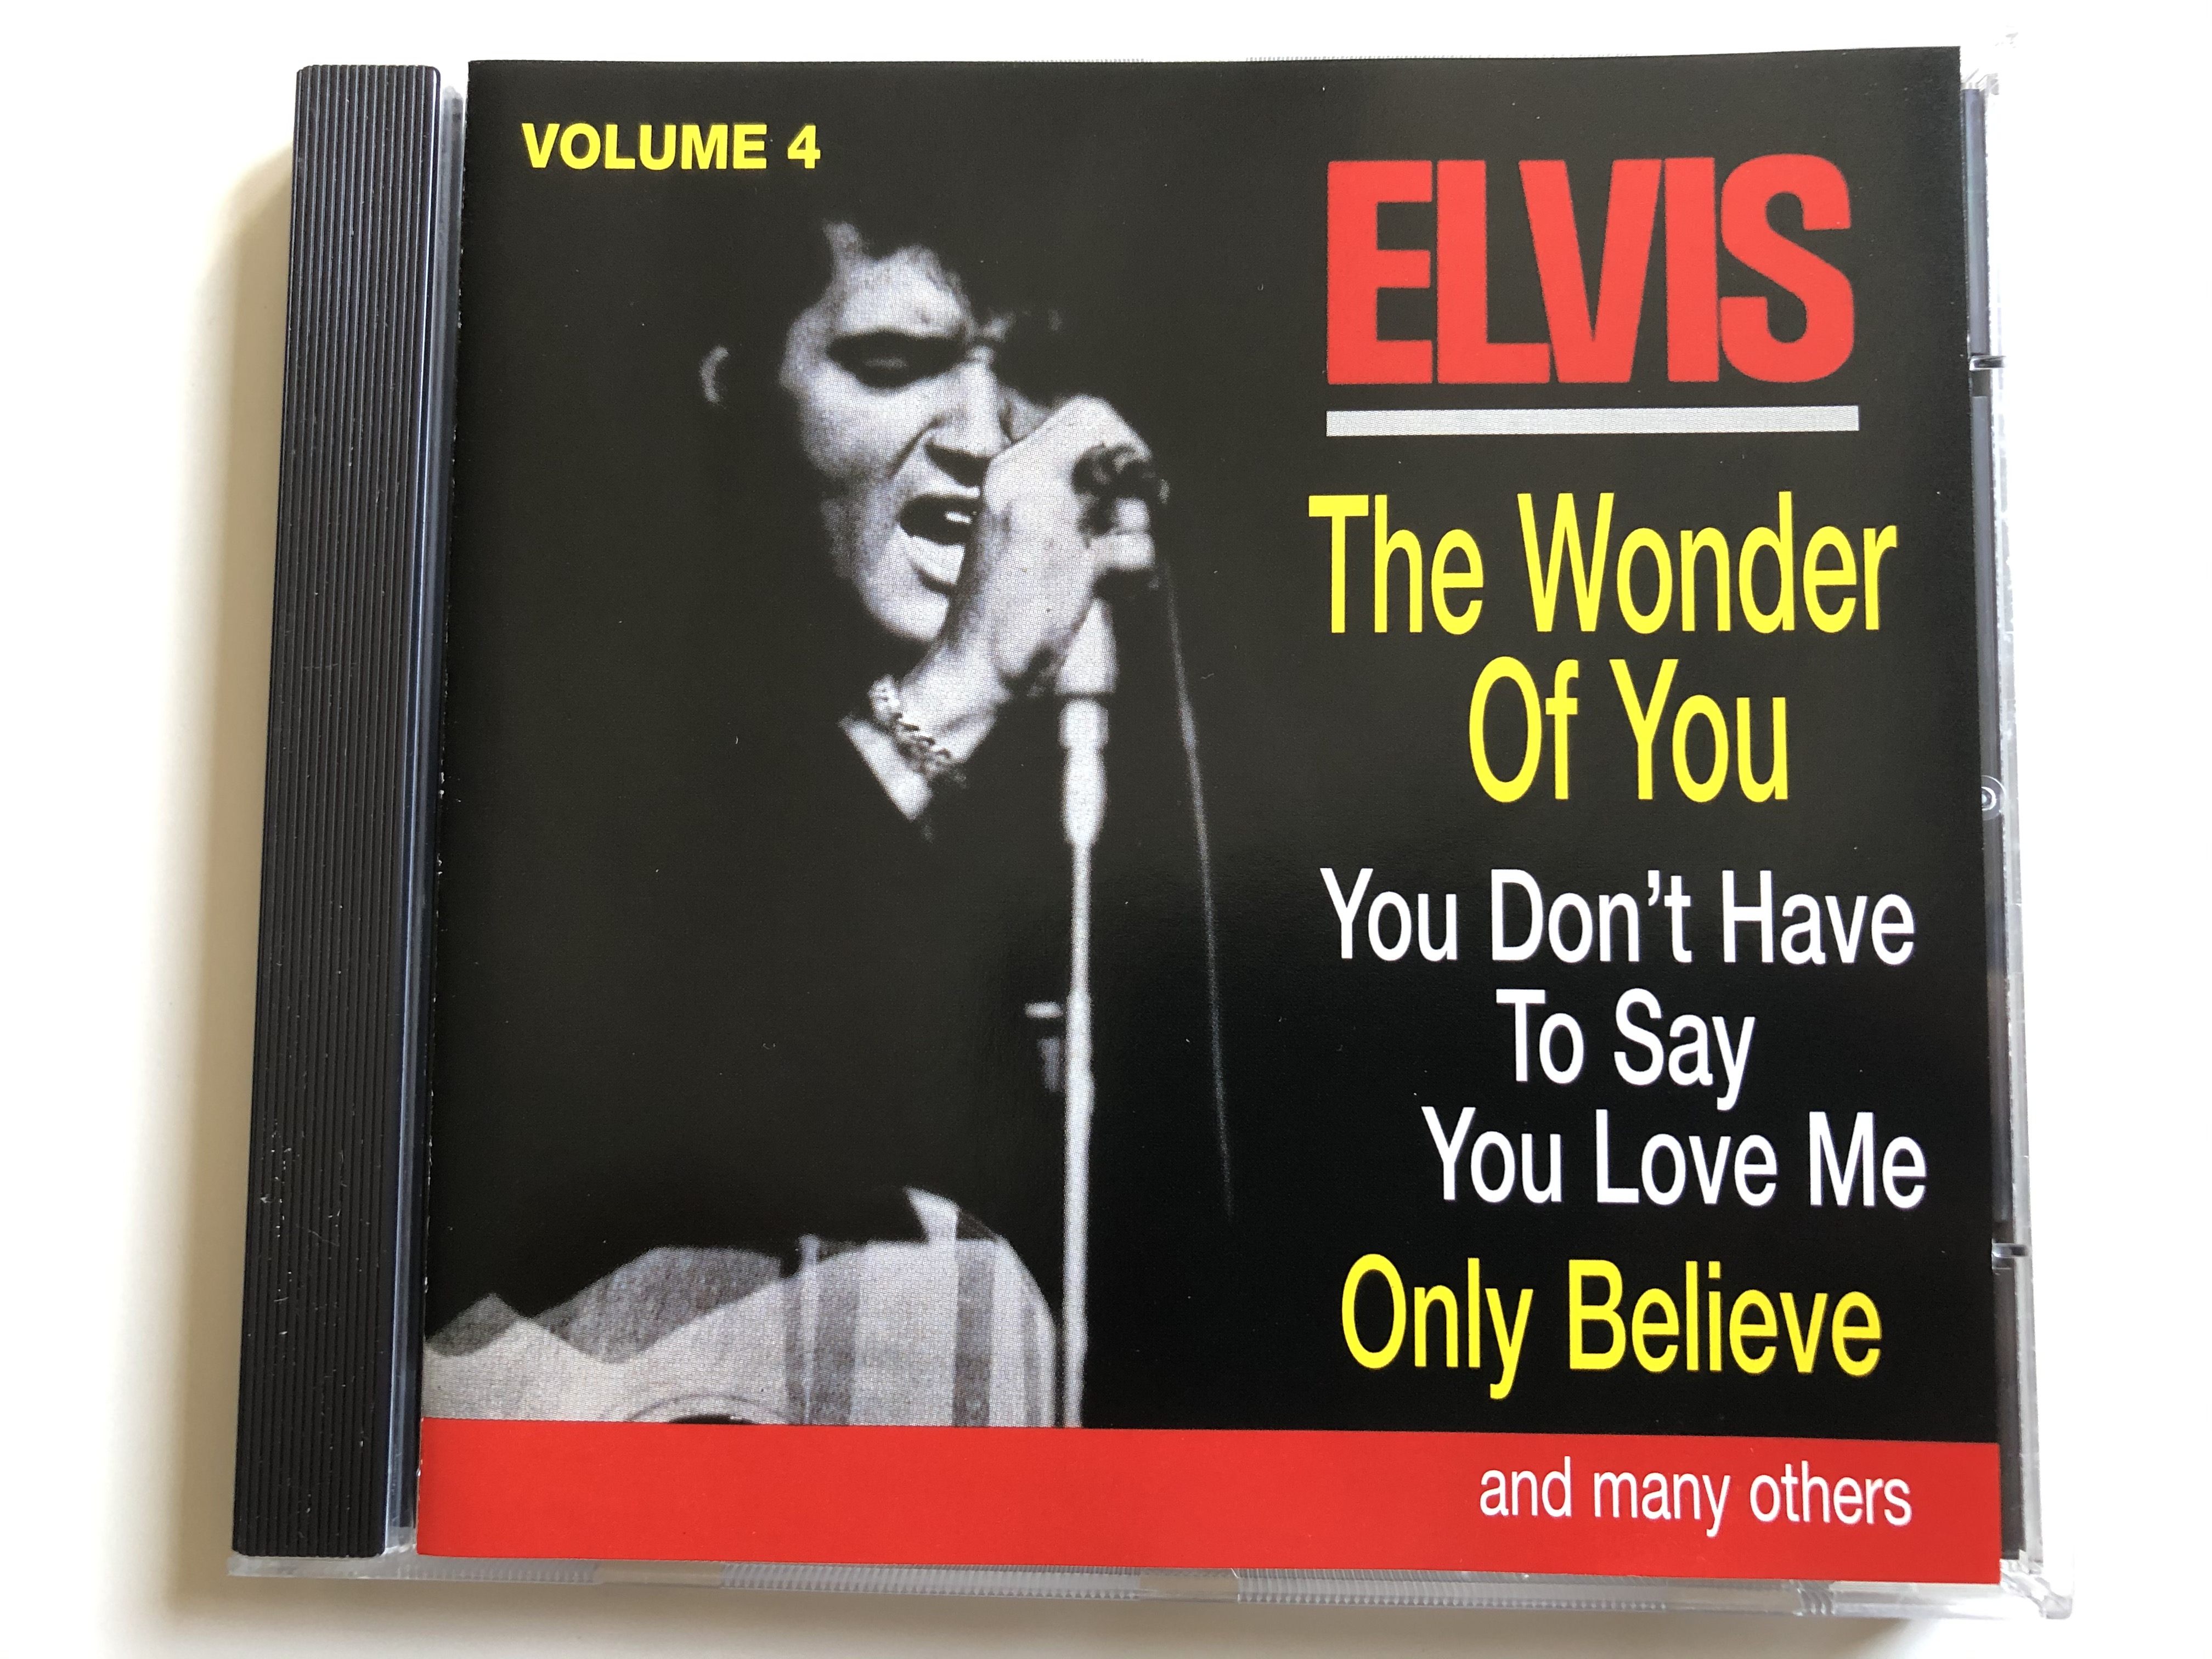 elvis-the-100-top-hits-collection-rca-5x-audio-cd-box-set-1997-stereo-36-428-1-17-.jpg